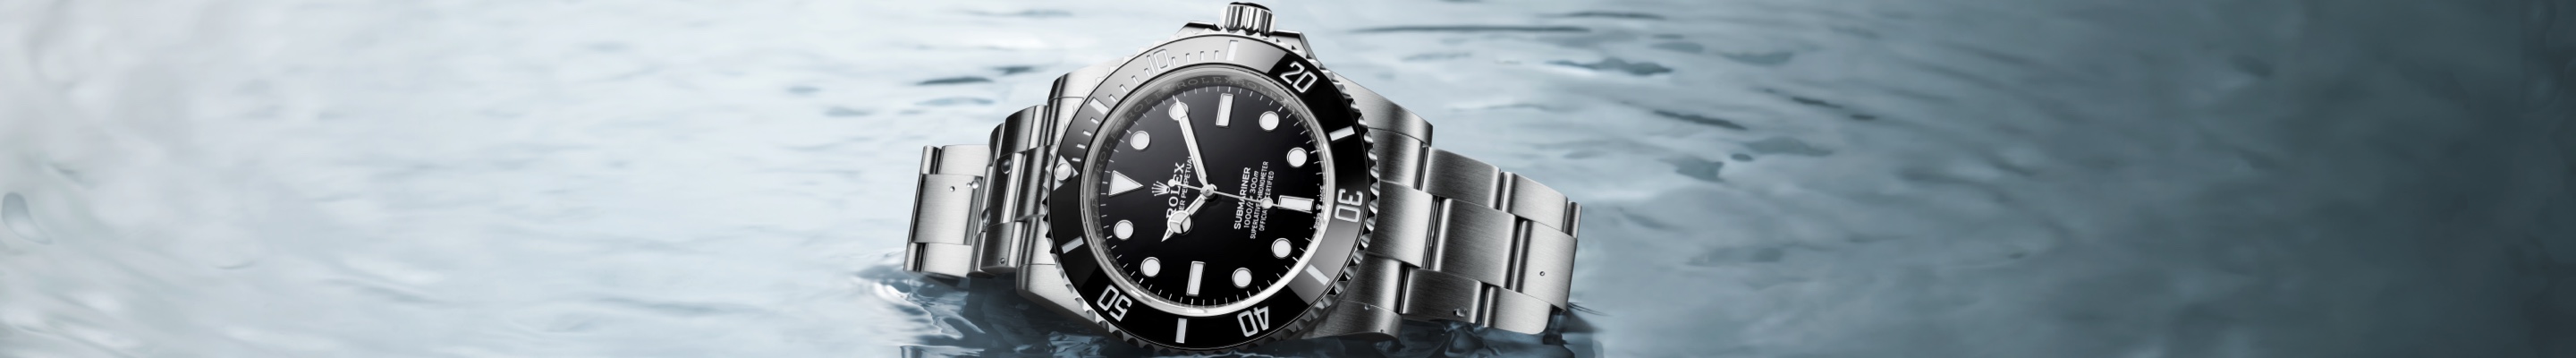 ROLEX: Oyster Perpetual Submariner